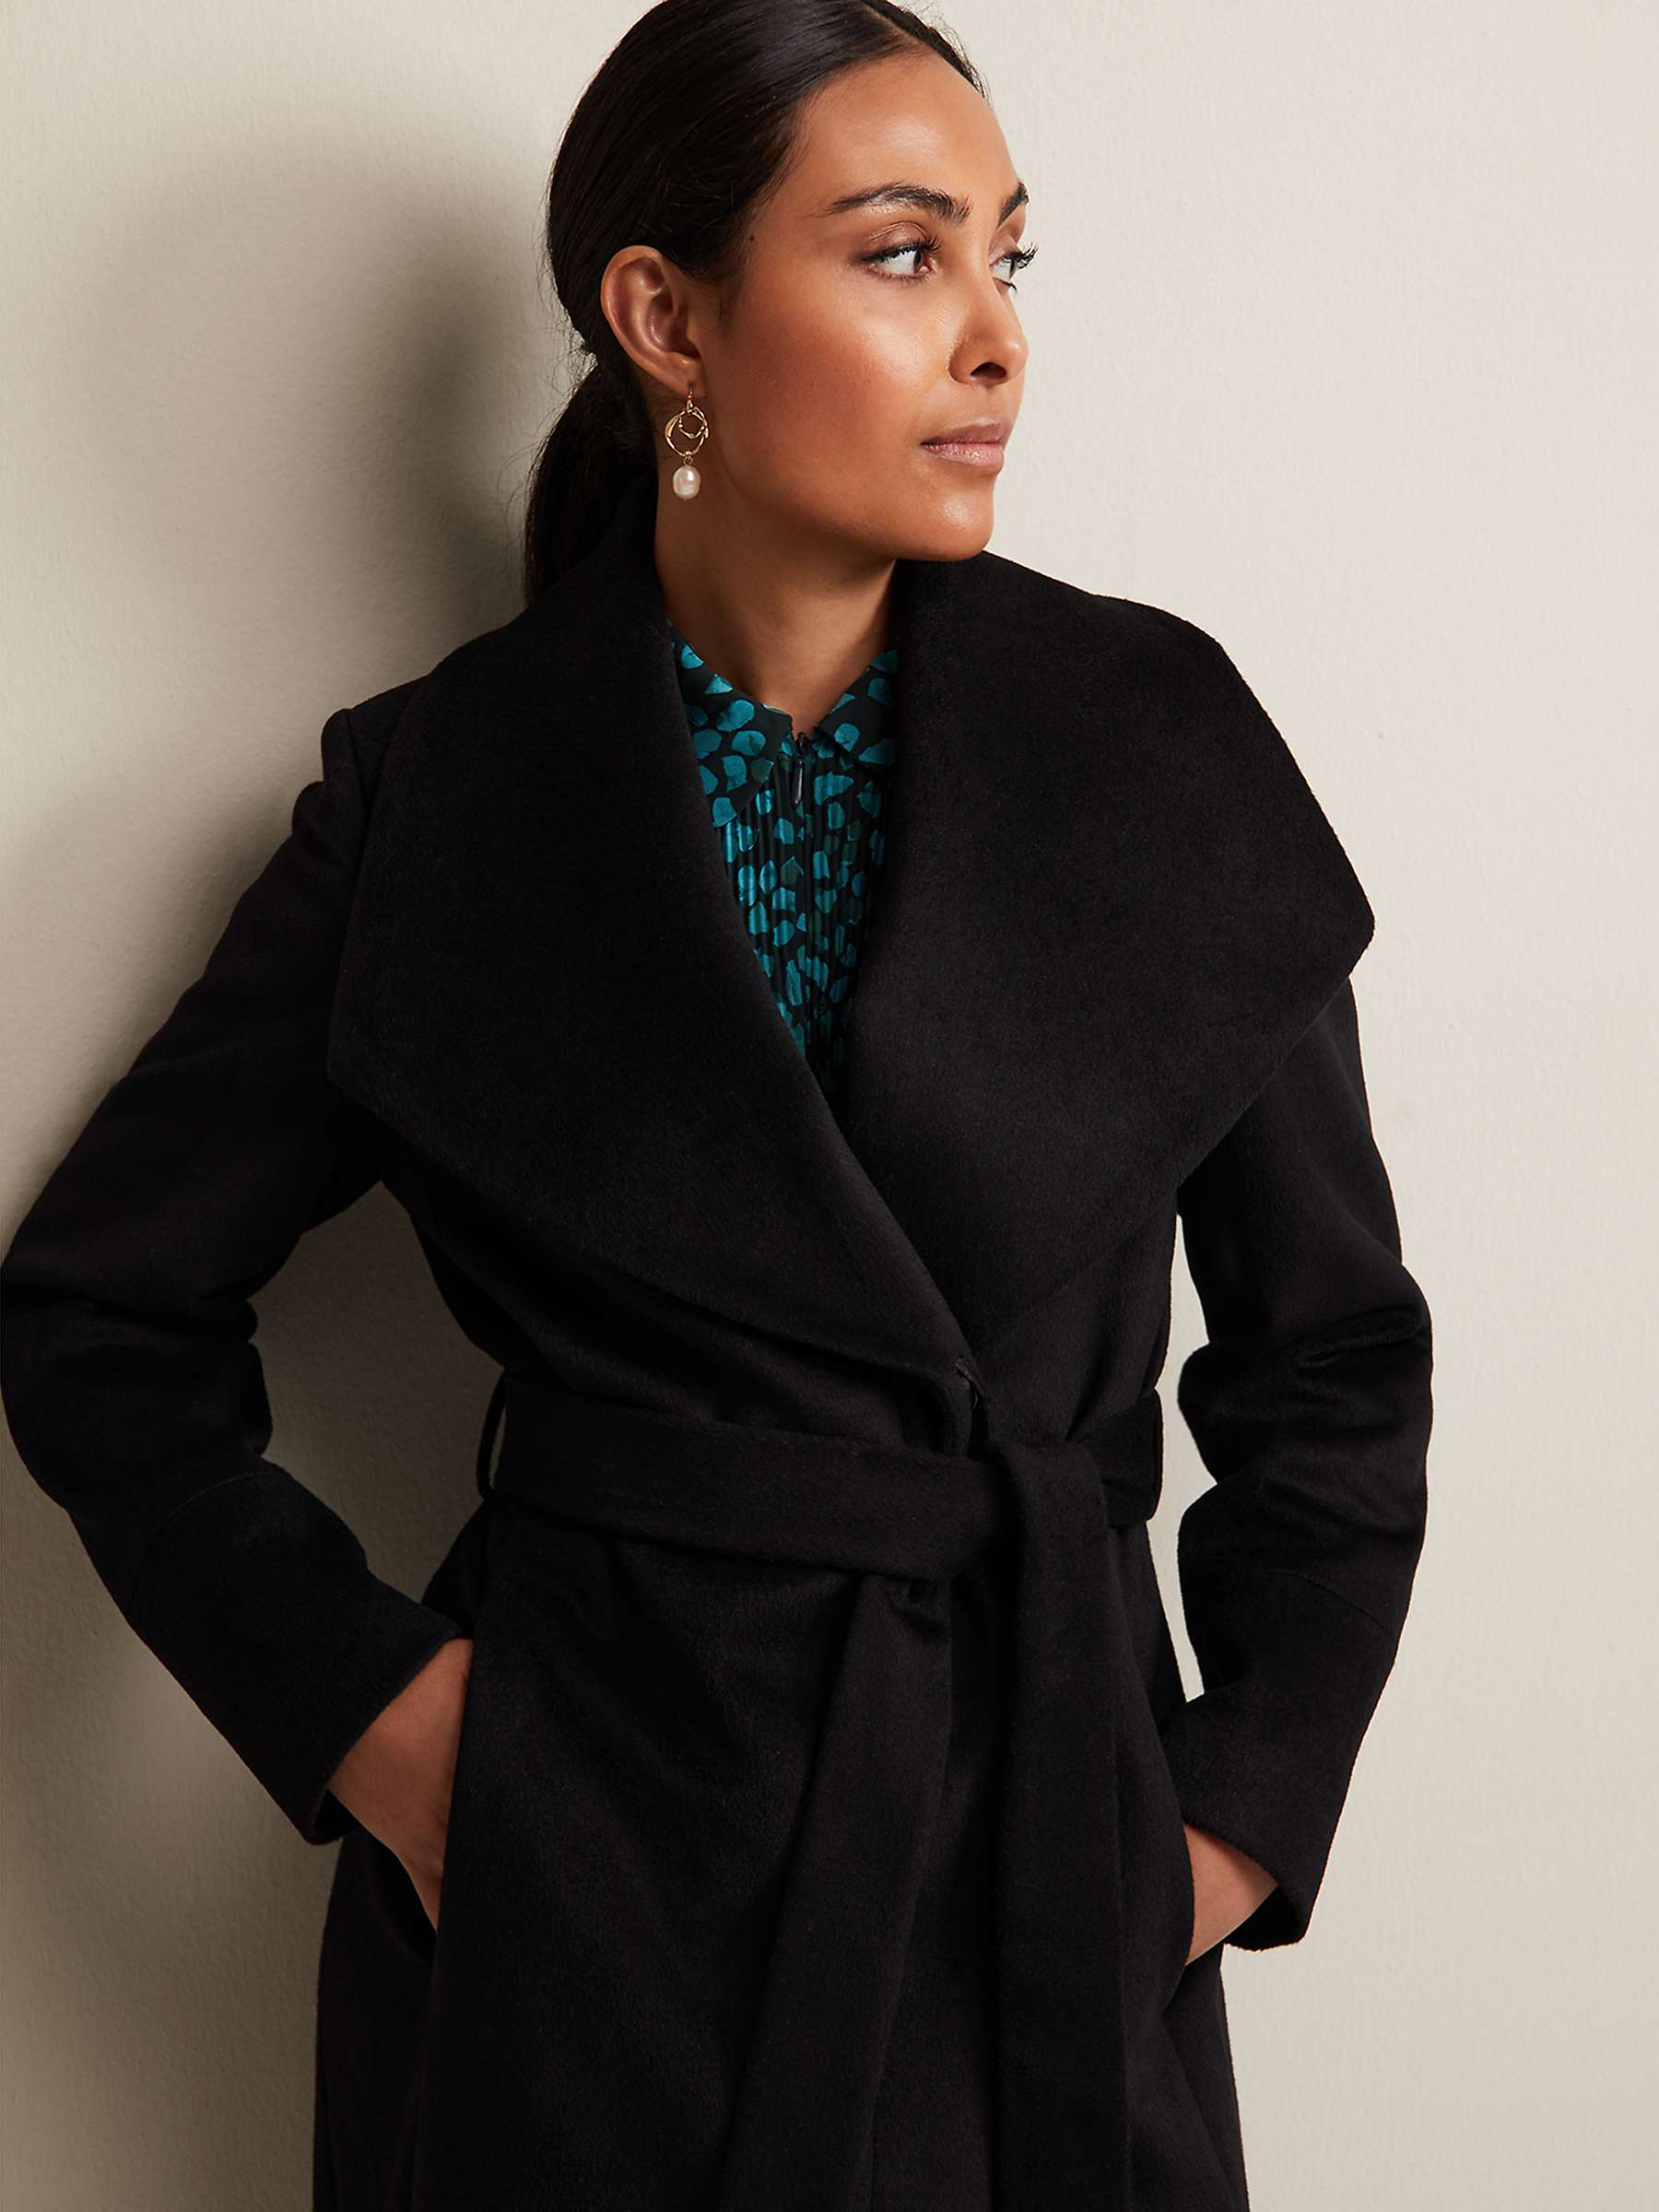 Buy Phase Eight Petite Nicci Wool Blend Coat Online at johnlewis.com